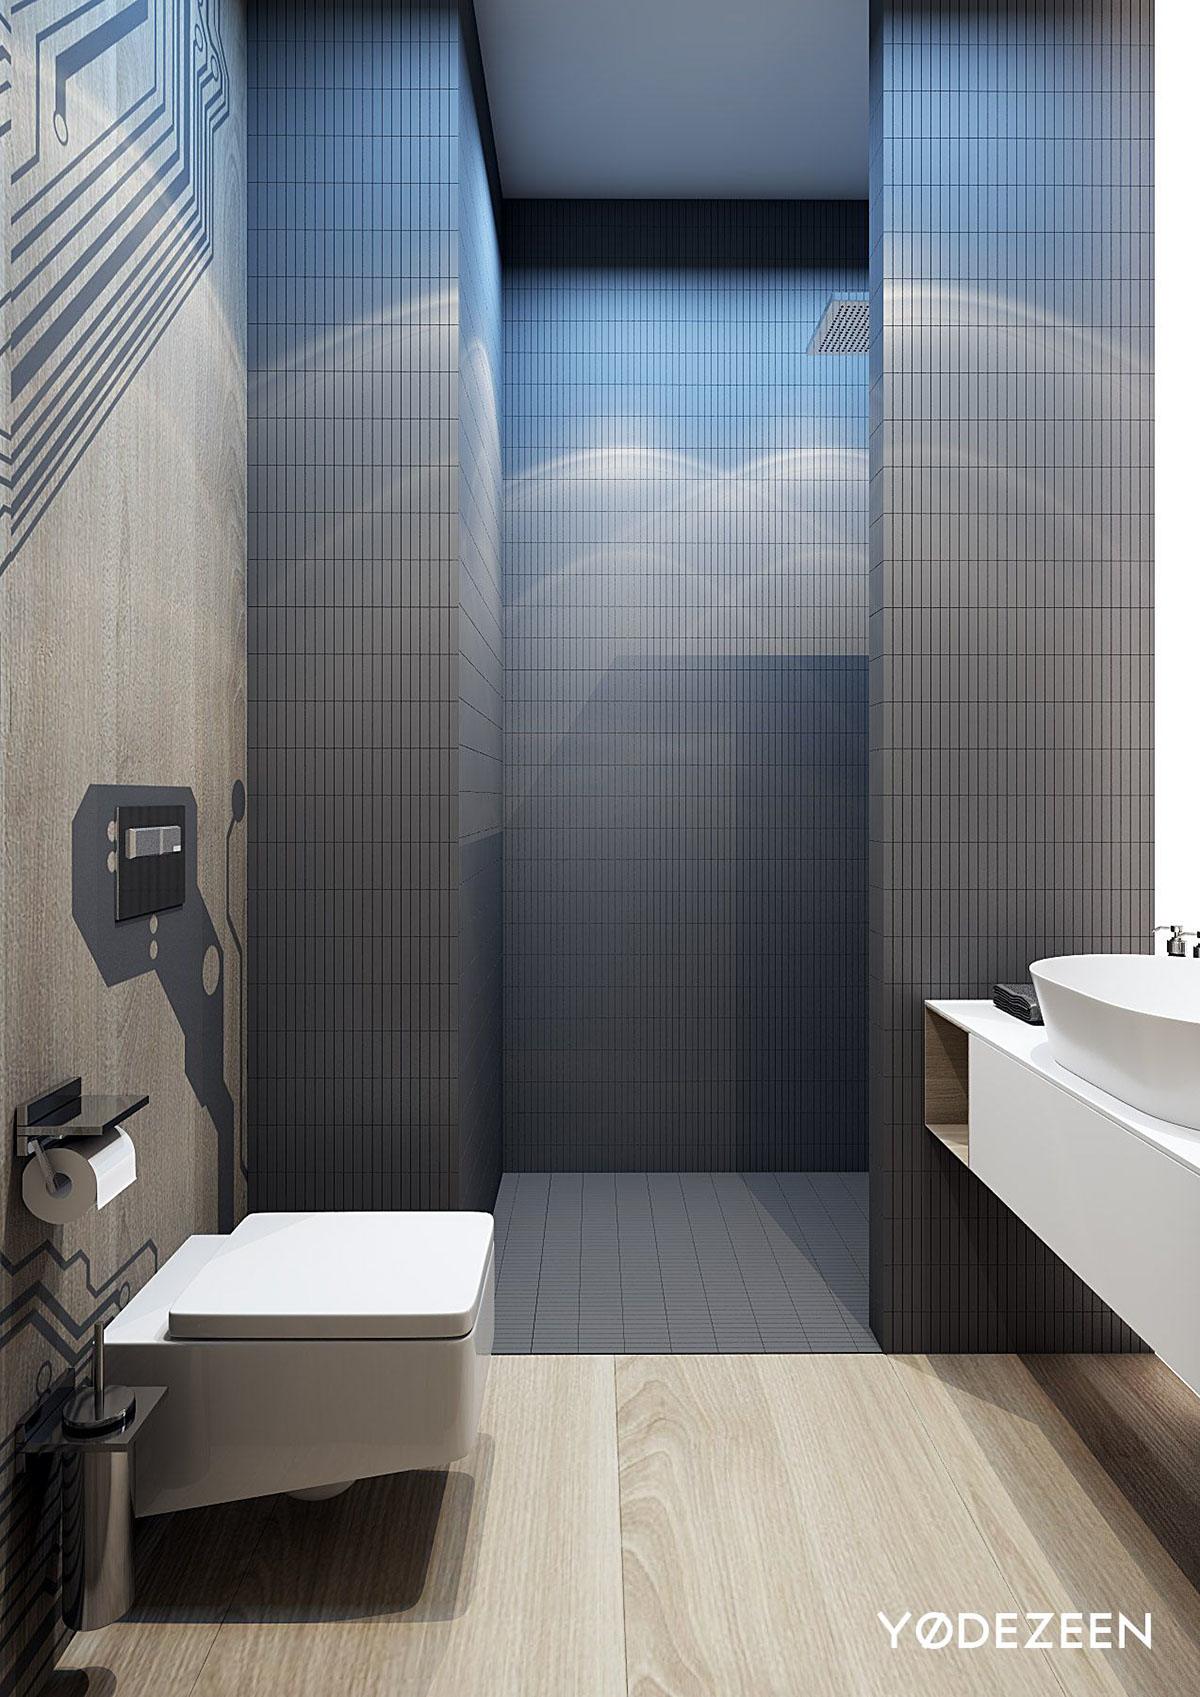 modern bathroom design "width =" 1200 "height =" 1697 "srcset =" https://mileray.com/wp-content/uploads/2020/05/1588516298_196_Contemporary-Bathroom-Decor-Ideas-Combined-With-Wooden-Accents-Become-a.jpg 1200w, https://mileray.com/ wp -content / uploads / 2016/09 / YØ-DEZEEN-212x300.jpg 212w, https://mileray.com/wp-content/uploads/2016/09/YØ-DEZEEN-768x1086.jpg 768w, https: // myfashionos .com / wp-content / uploads / 2016/09 / YØ-DEZEEN-724x1024.jpg 724w, https://mileray.com/wp-content/uploads/2016/09/YØ-DEZEEN-696x984.jpg 696w, https : //mileray.com/wp-content/uploads/2016/09/YØ-DEZEEN-1068x1510.jpg 1068w, https://mileray.com/wp-content/uploads/2016/09/YØ-DEZEEN-297x420. jpg 297w "sizes =" (maximum width: 1200px) 100vw, 1200px